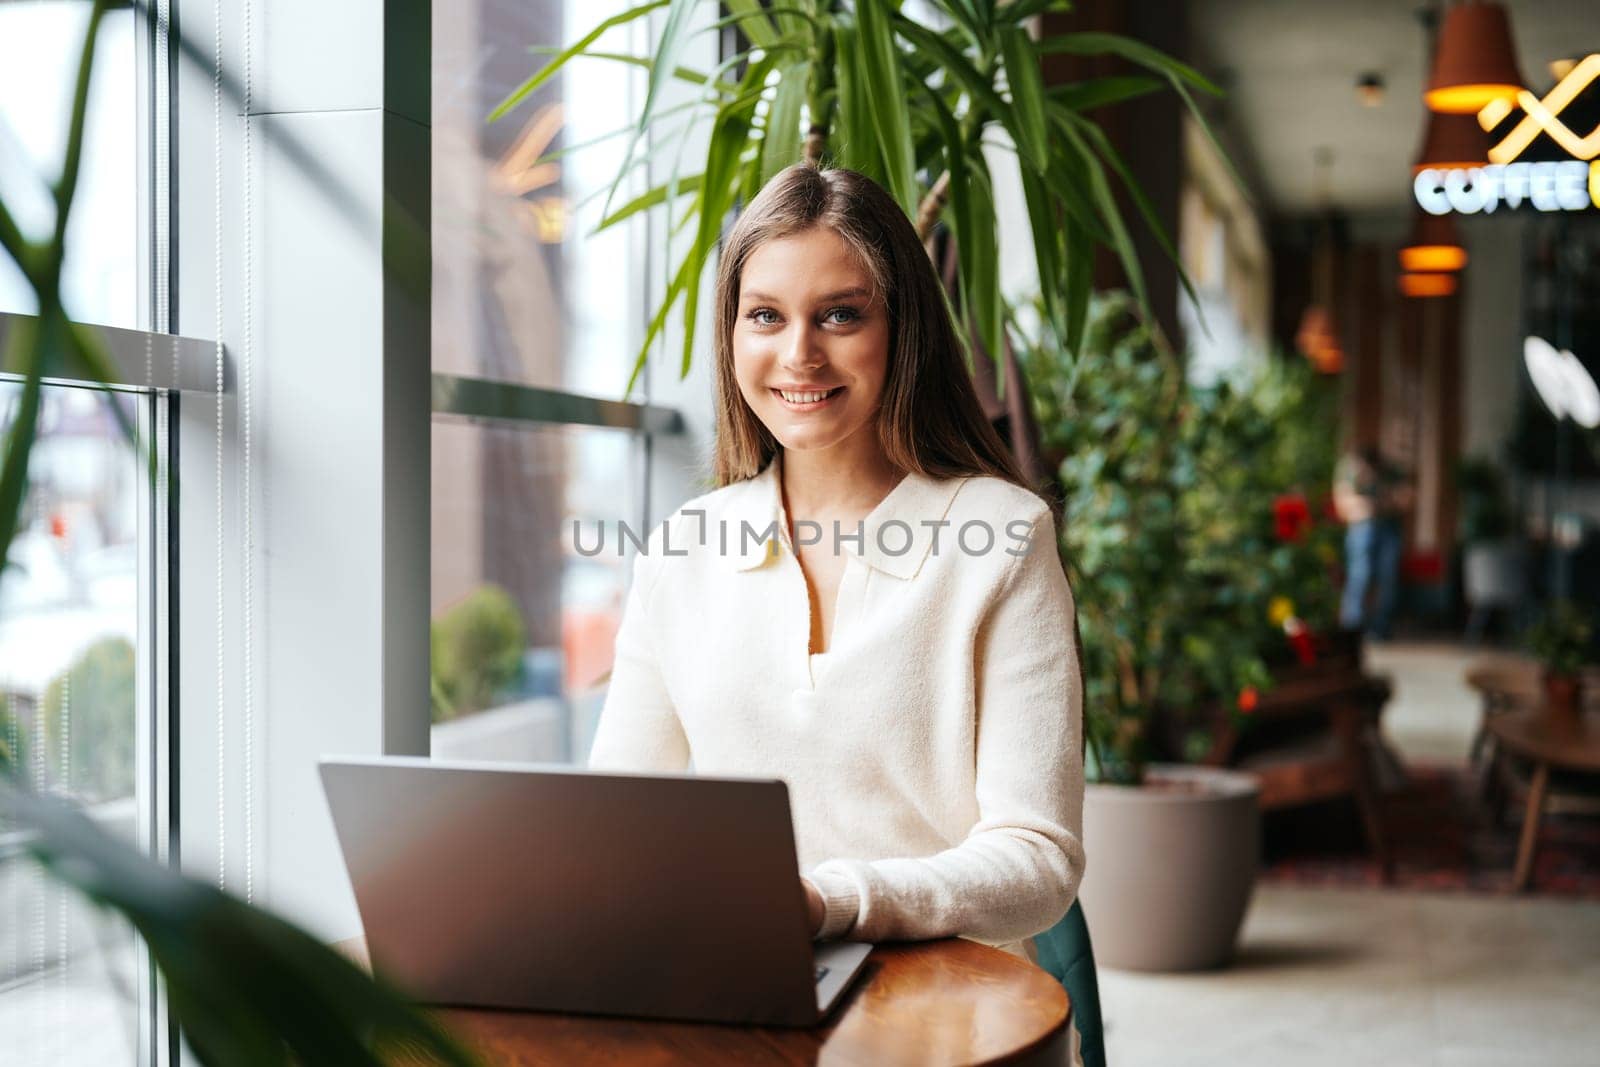 A cheerful young woman is seated at a wooden table in a well-lit cafe, working on her laptop. Her attention is momentarily diverted away from the screen as she smiles towards someone or something, giving off a pleasant and relaxed vibe amidst the indoor greenery that adorns the environment.